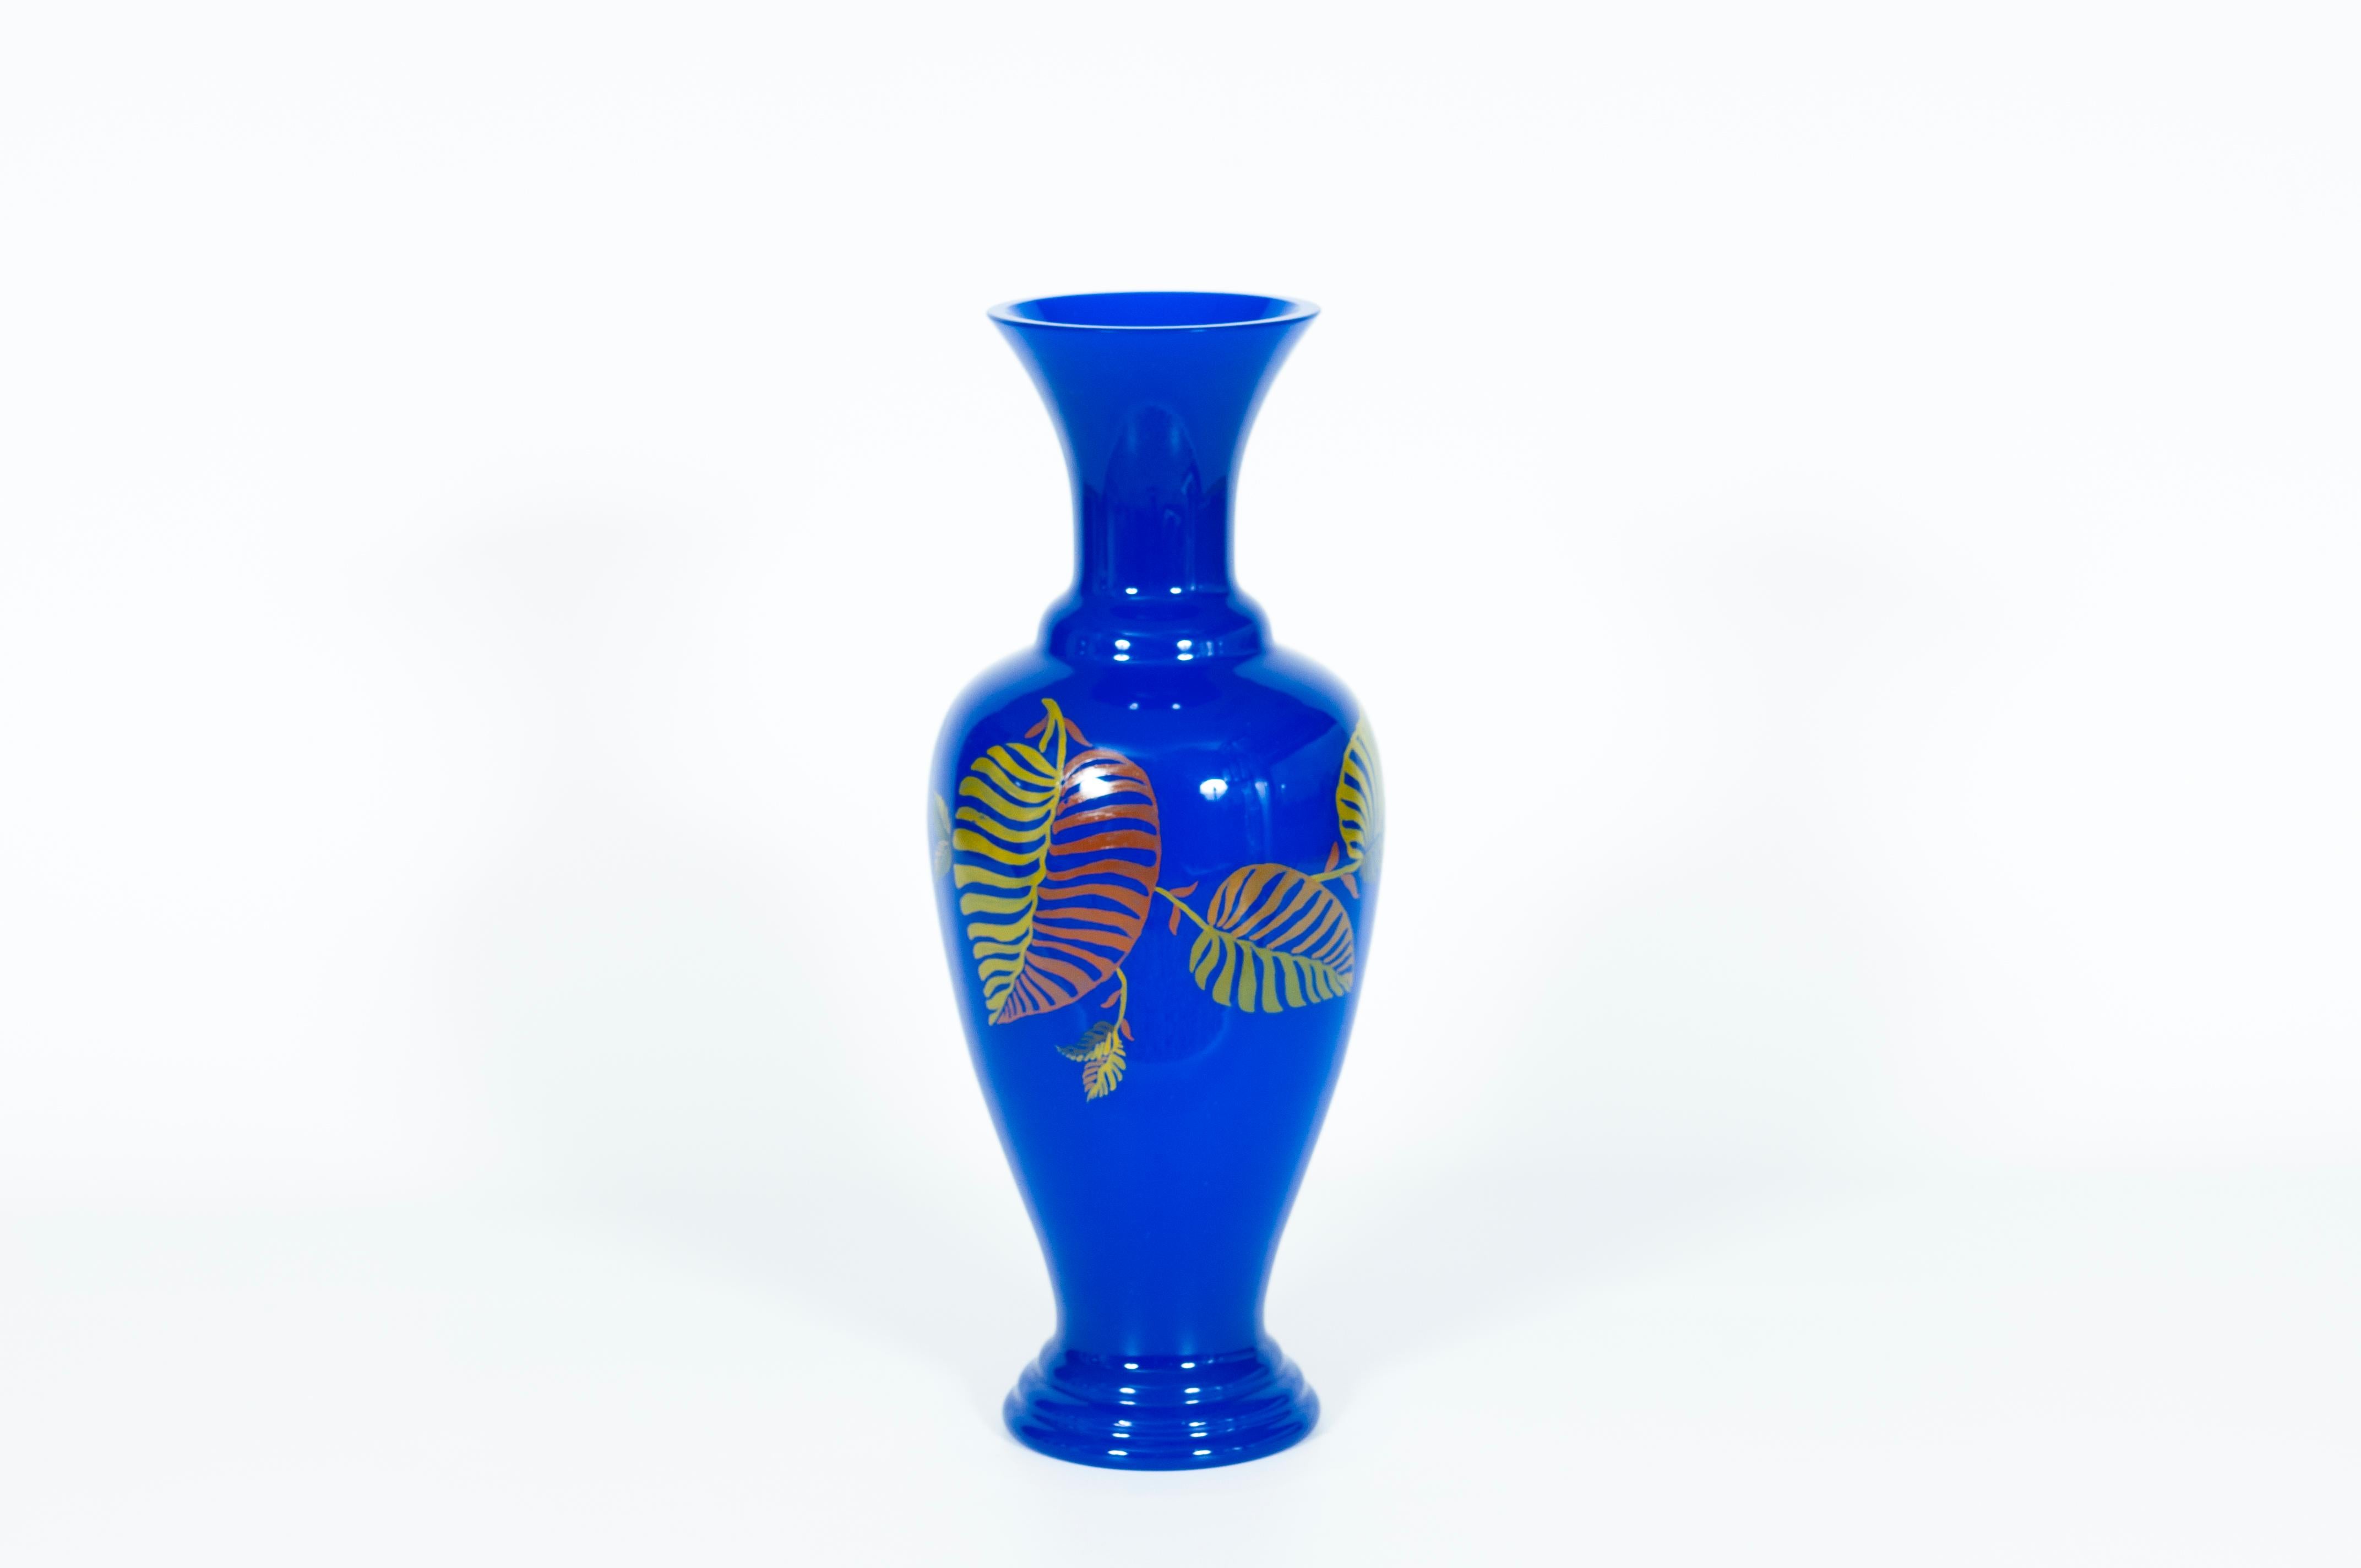 Blue Pair of Murano Glass Vases with Art Painting, Giovanni Dalla Fina, 1980s For Sale 4